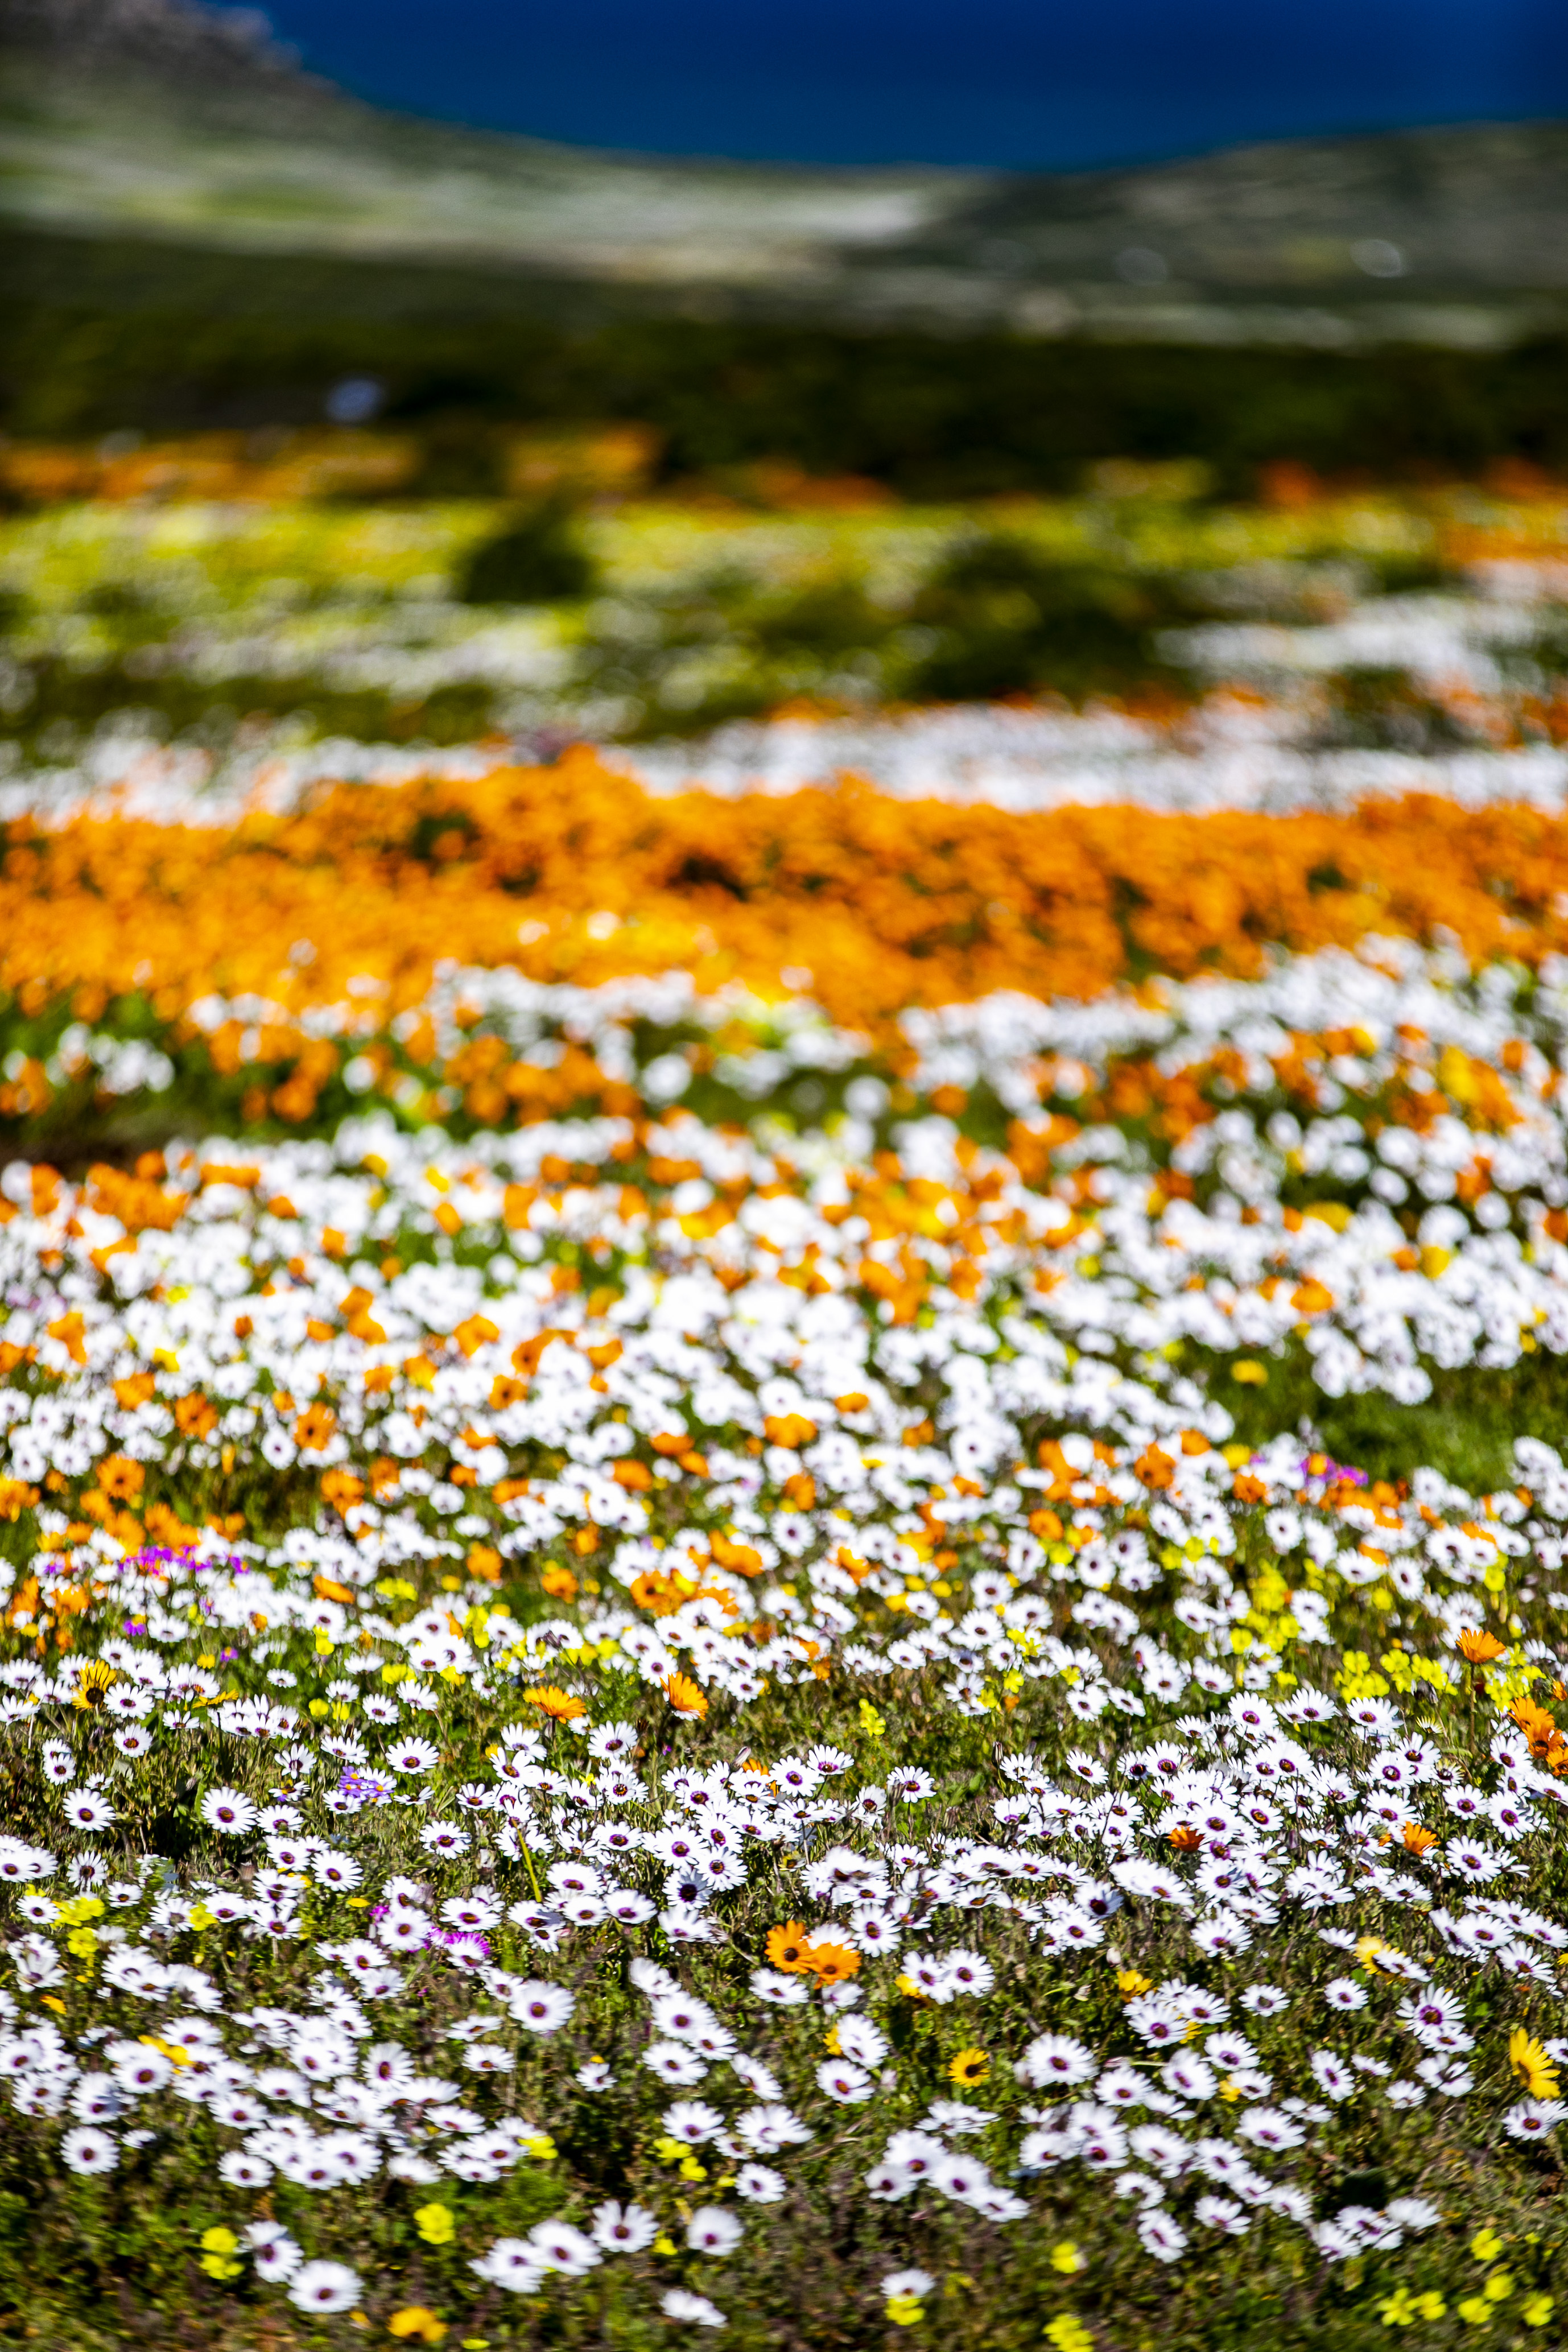 Fields of flowers appear out of dry conditions of the West Coast National Park on August 26, 2020 in Postberg, South Africa.